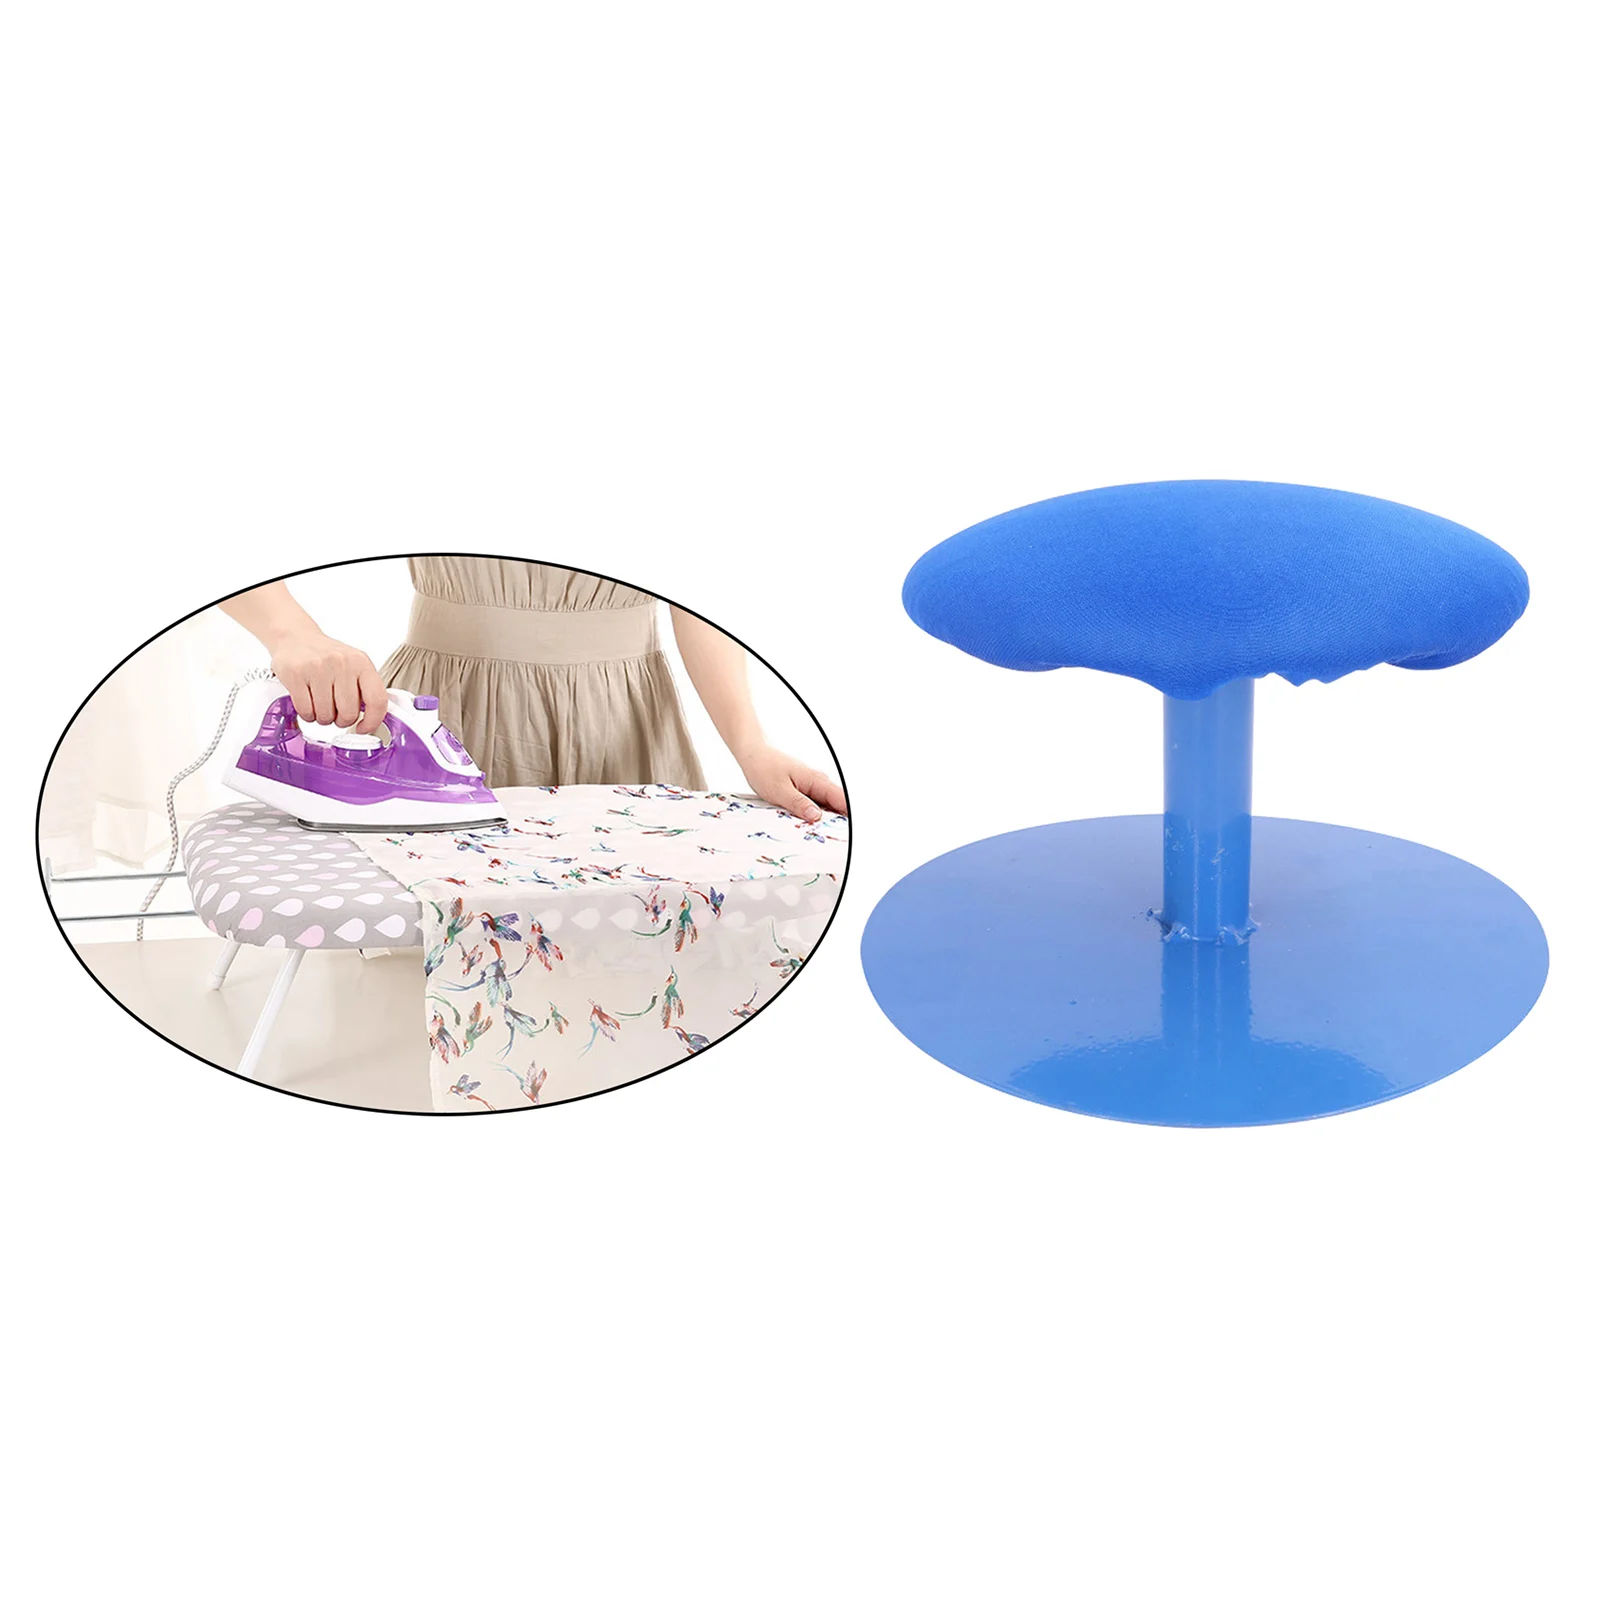 Pro Travel Mini Ironing Board Heat Resistant Home Cuffs Collars Handling Table Tailors Dressmaker Tools for Ironing Household